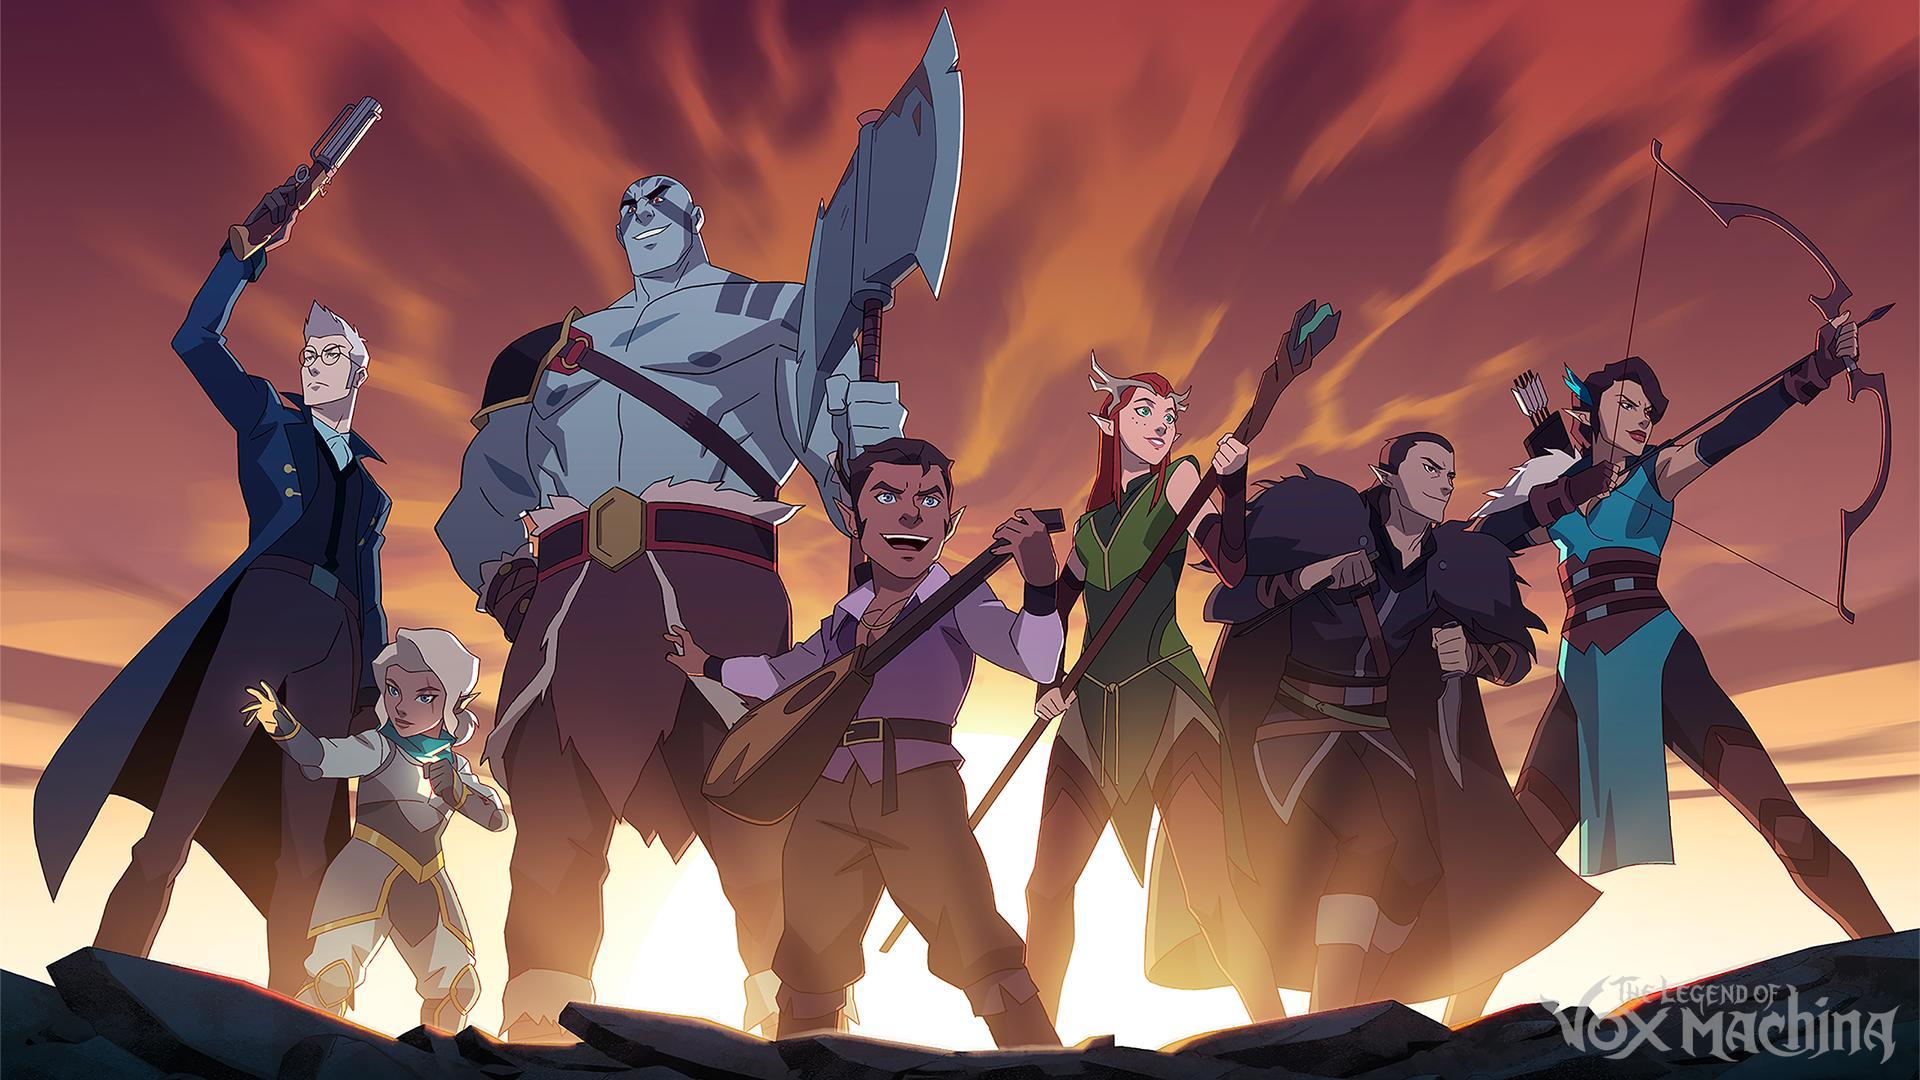 REVIEW: The Legend of Vox Machina Season 2 Episode 2 Brings the Levity Back